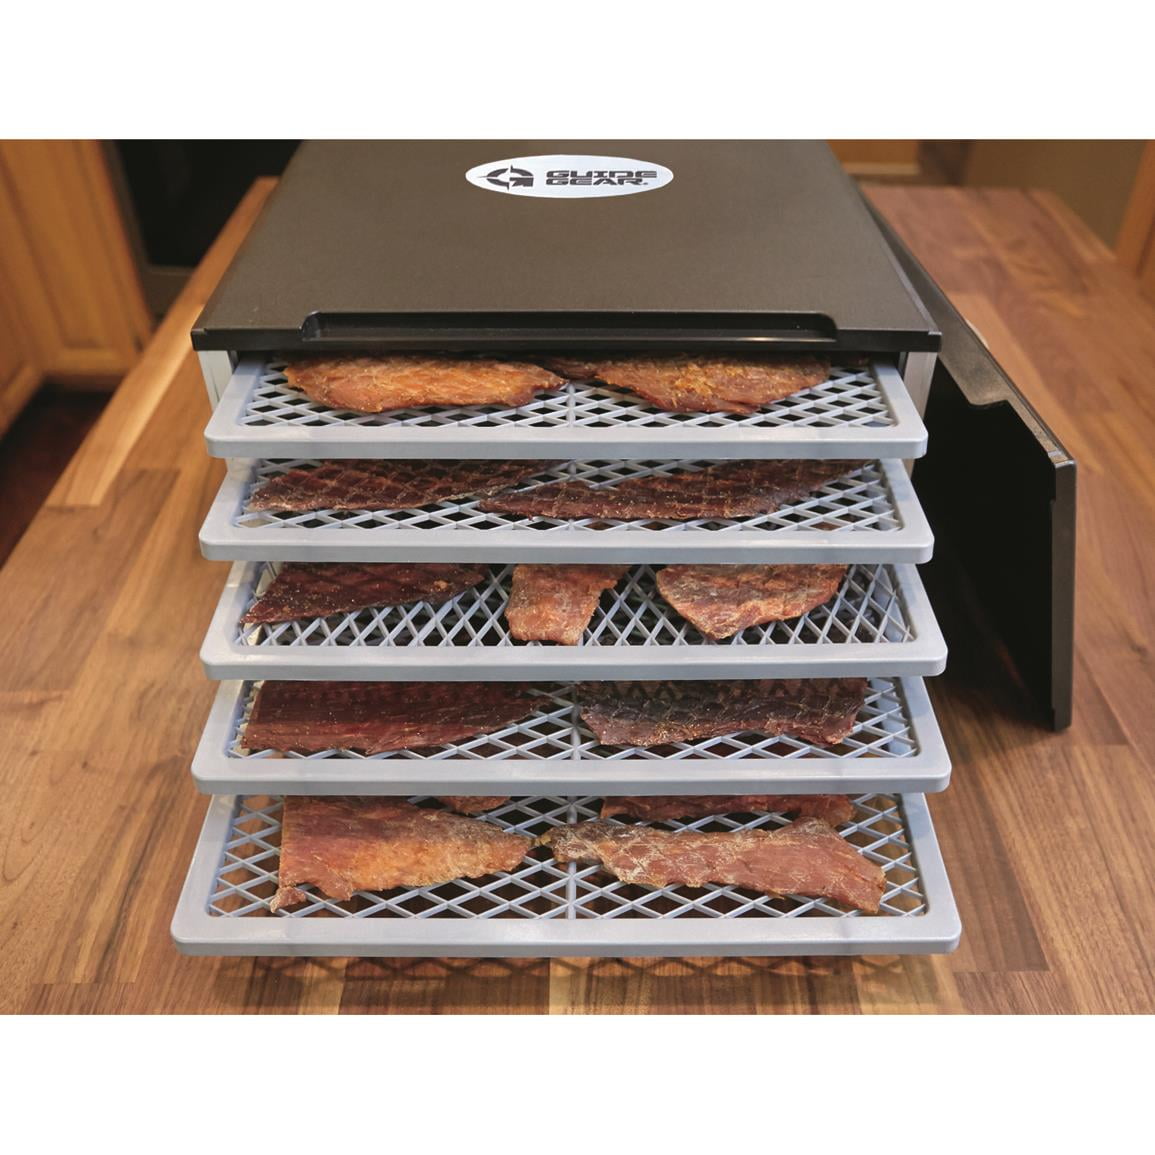 Weston Food Dehydrator Machine for Beef Jerky, Fruit Leather, Herbs, Dog  Treats, Vegetables, Meats, BPA Free, Slide Out Drying Racks (75-0201-W), 10